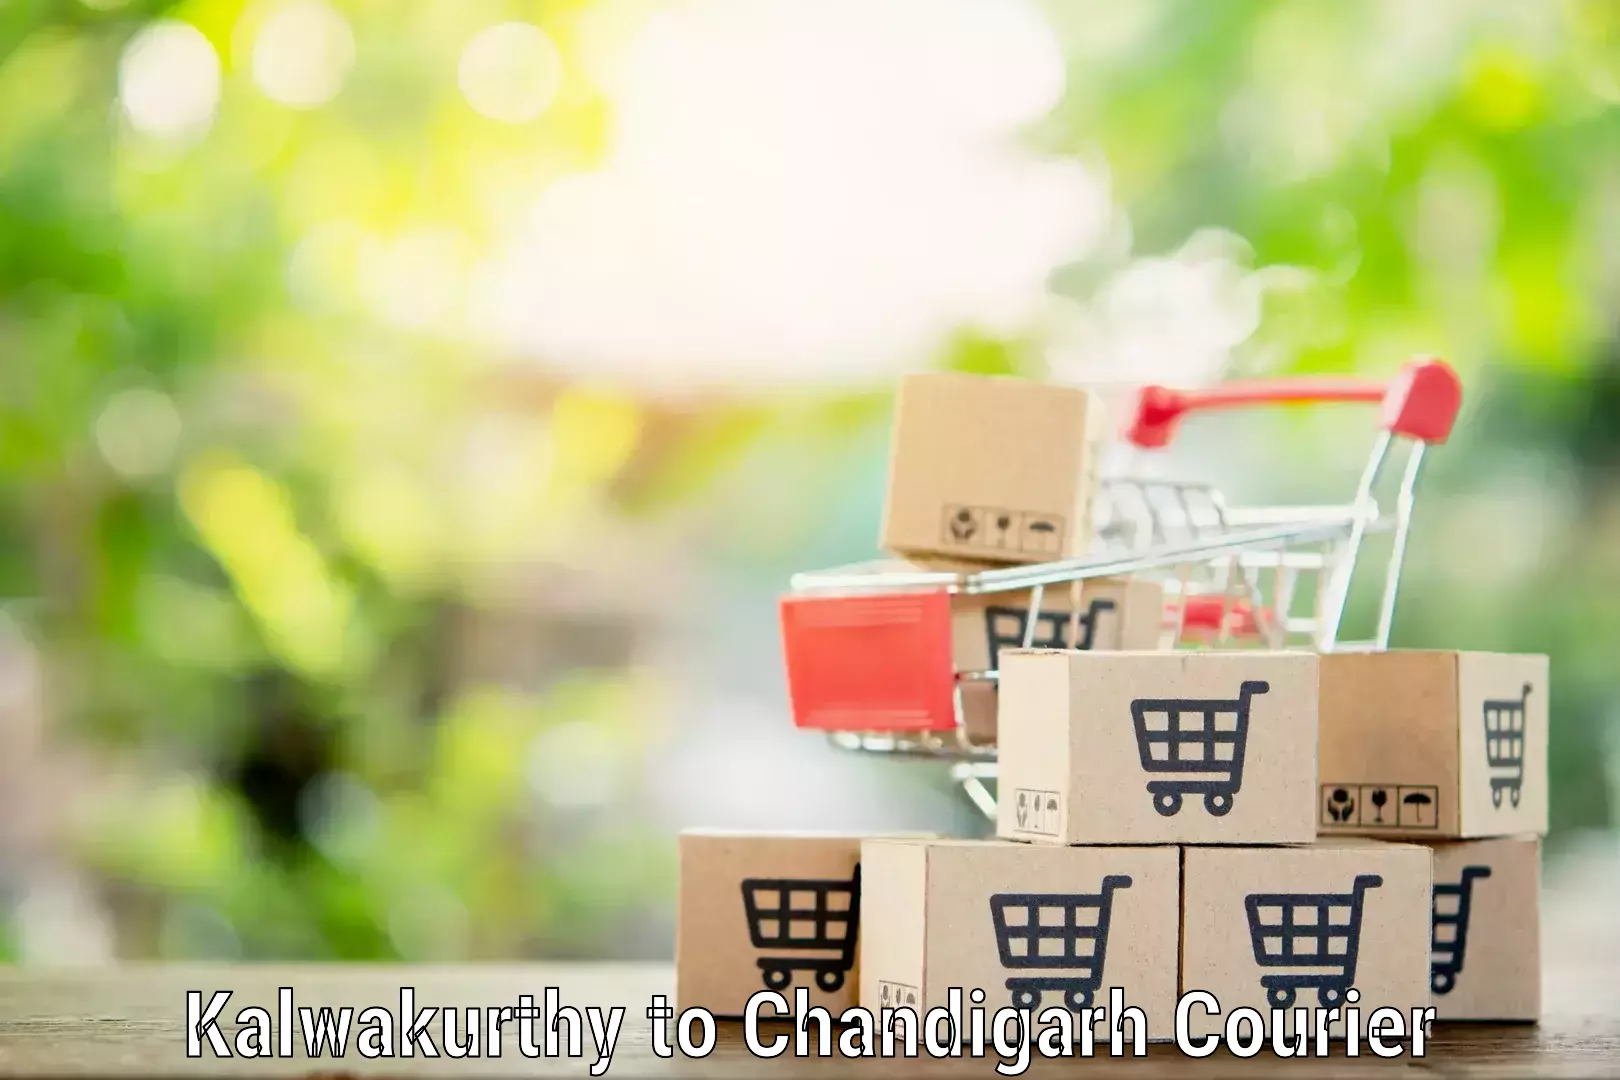 Quality relocation services Kalwakurthy to Chandigarh